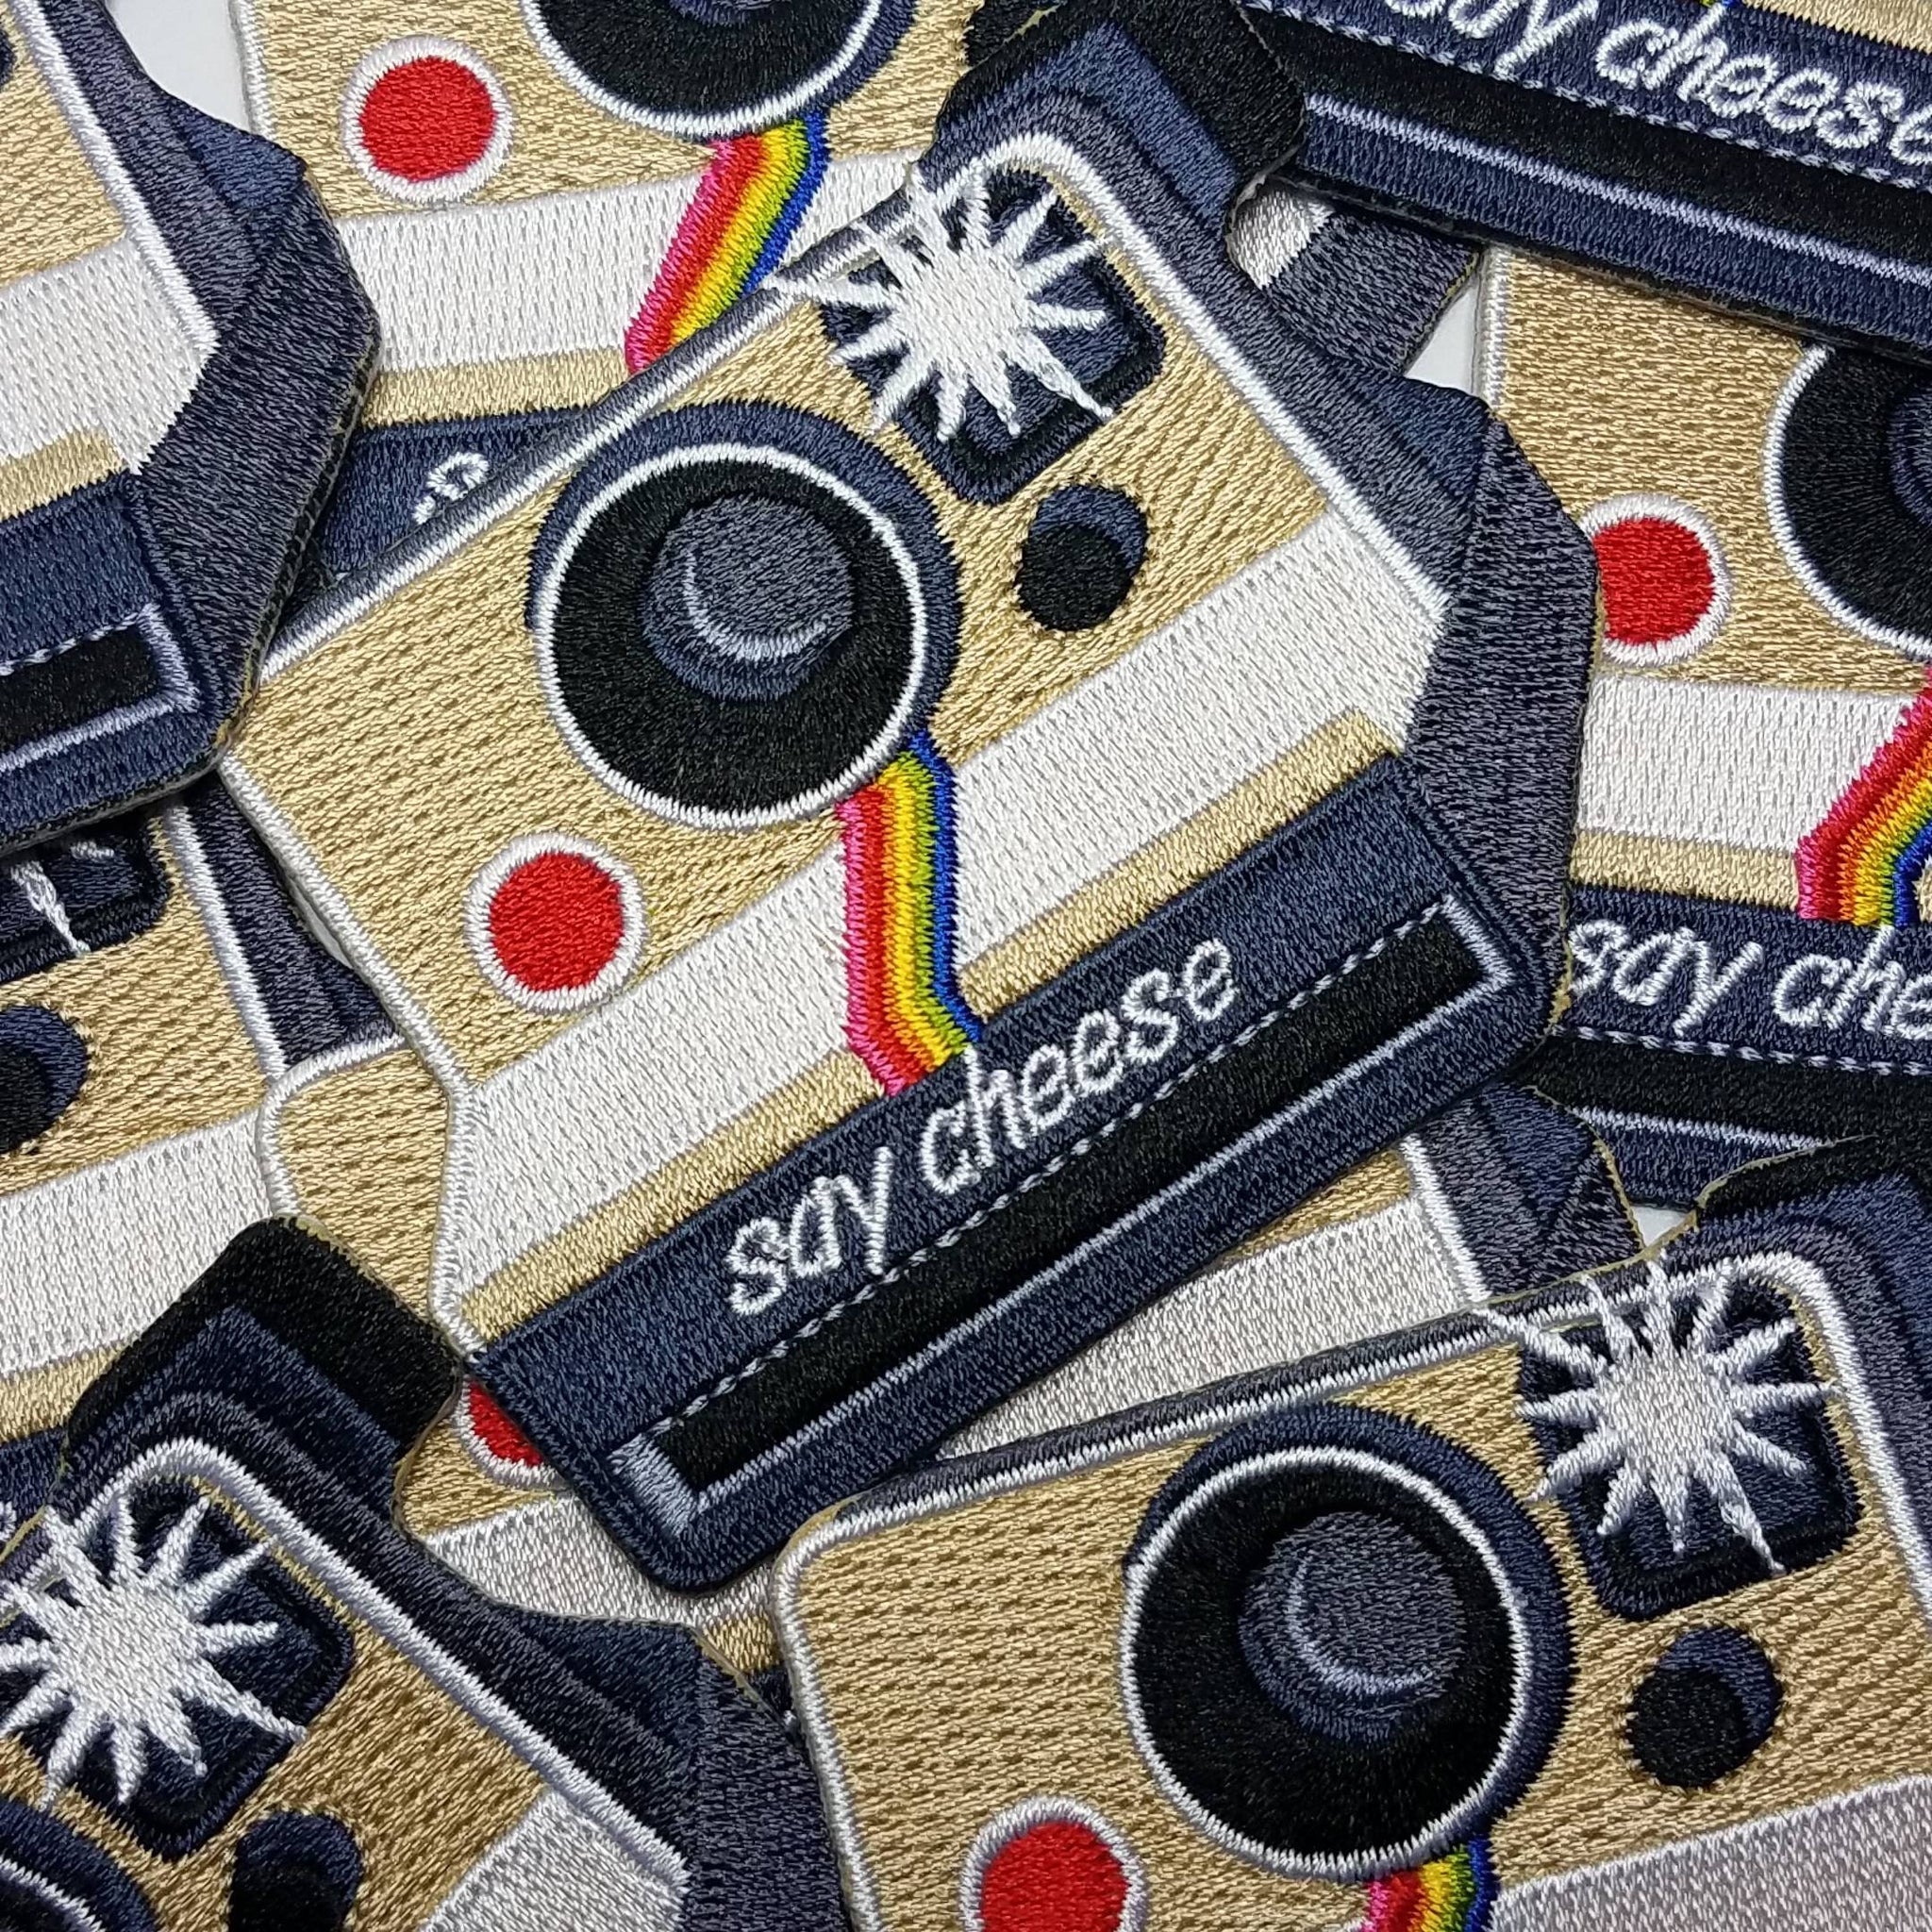 Nostalgic "Say Cheese" Polaroid Camera Iron-on Patch, Kawaii Embroidered Applique; Patch for Clothing, Hats,  Jackets, and more Size 3"x2"